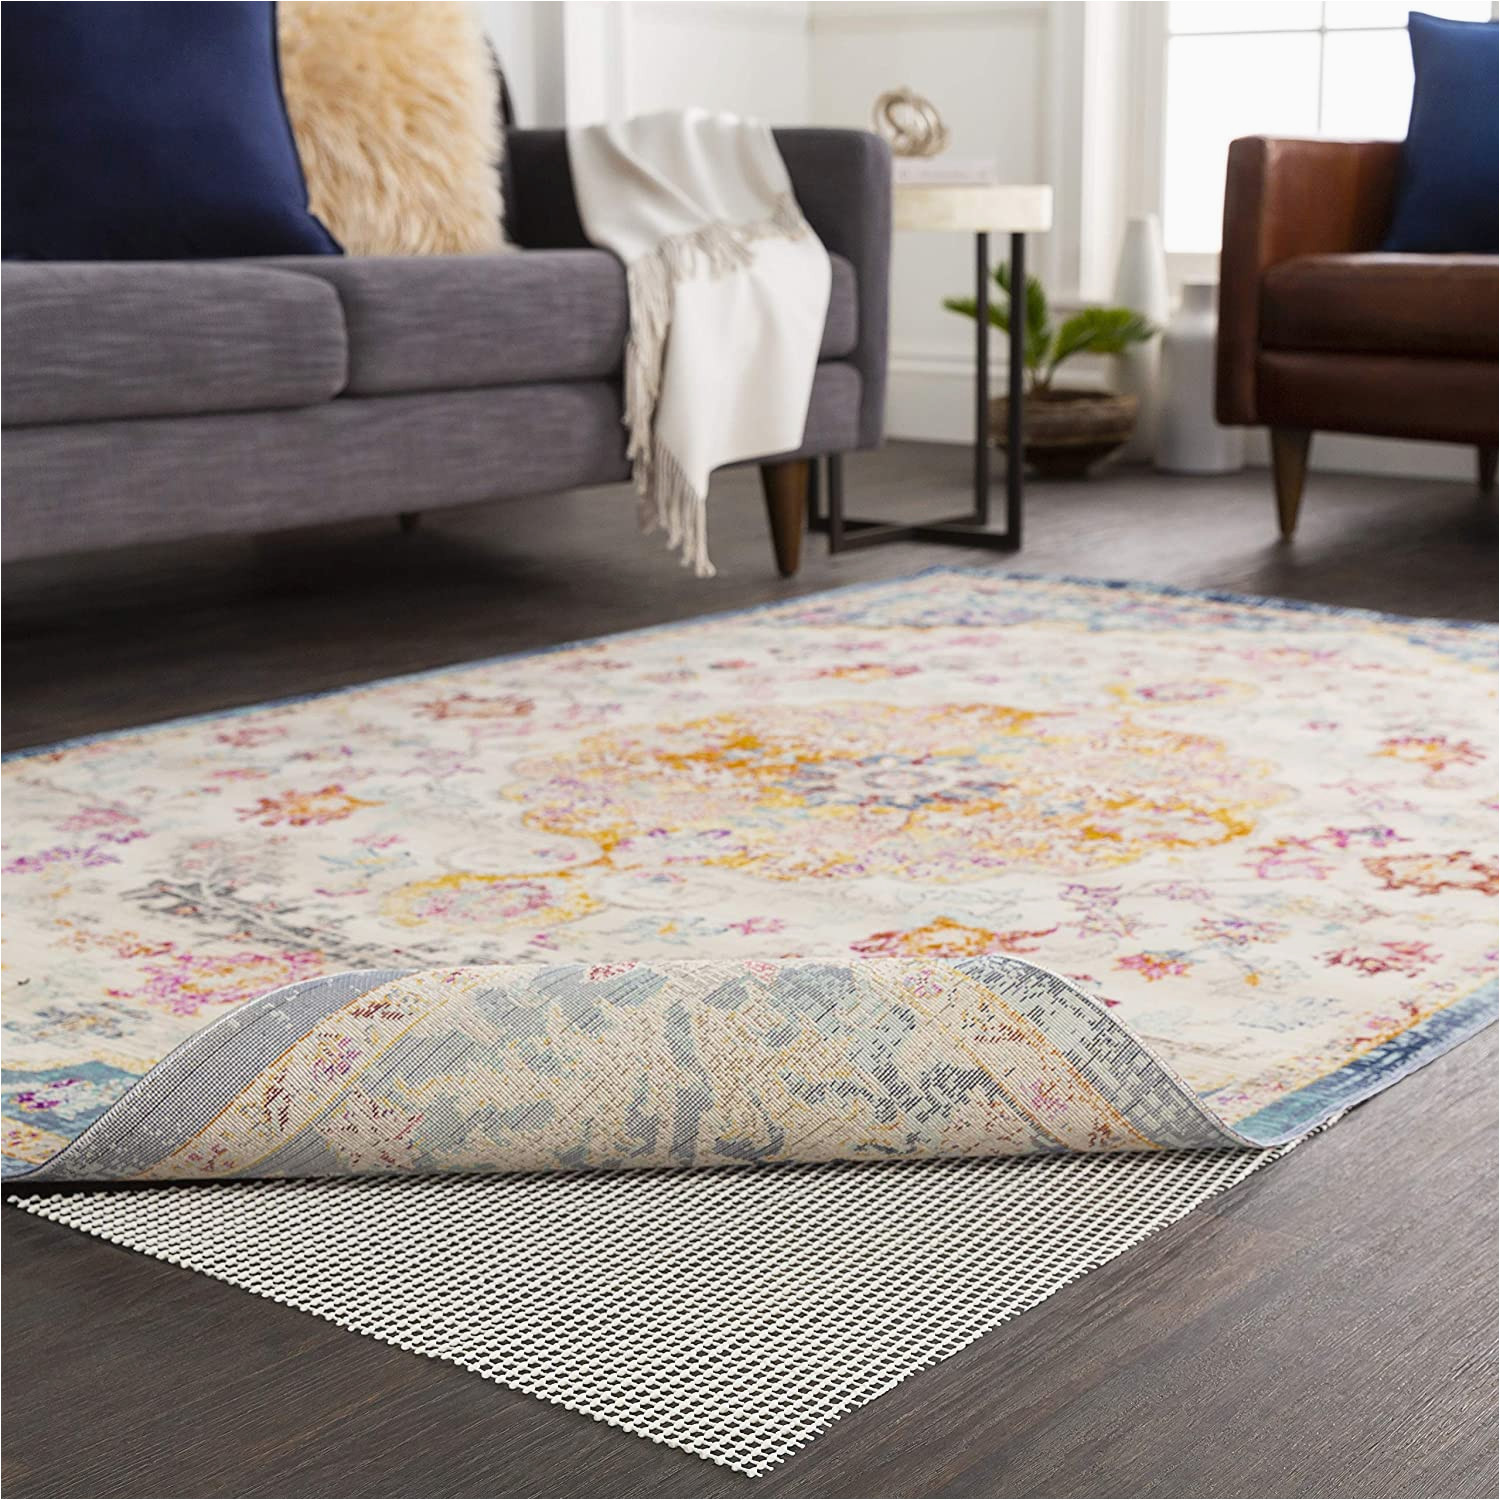 12ft by 12ft area Rugs Artistic Weavers Lock Grip Carpet Pad 8ft X 12ft